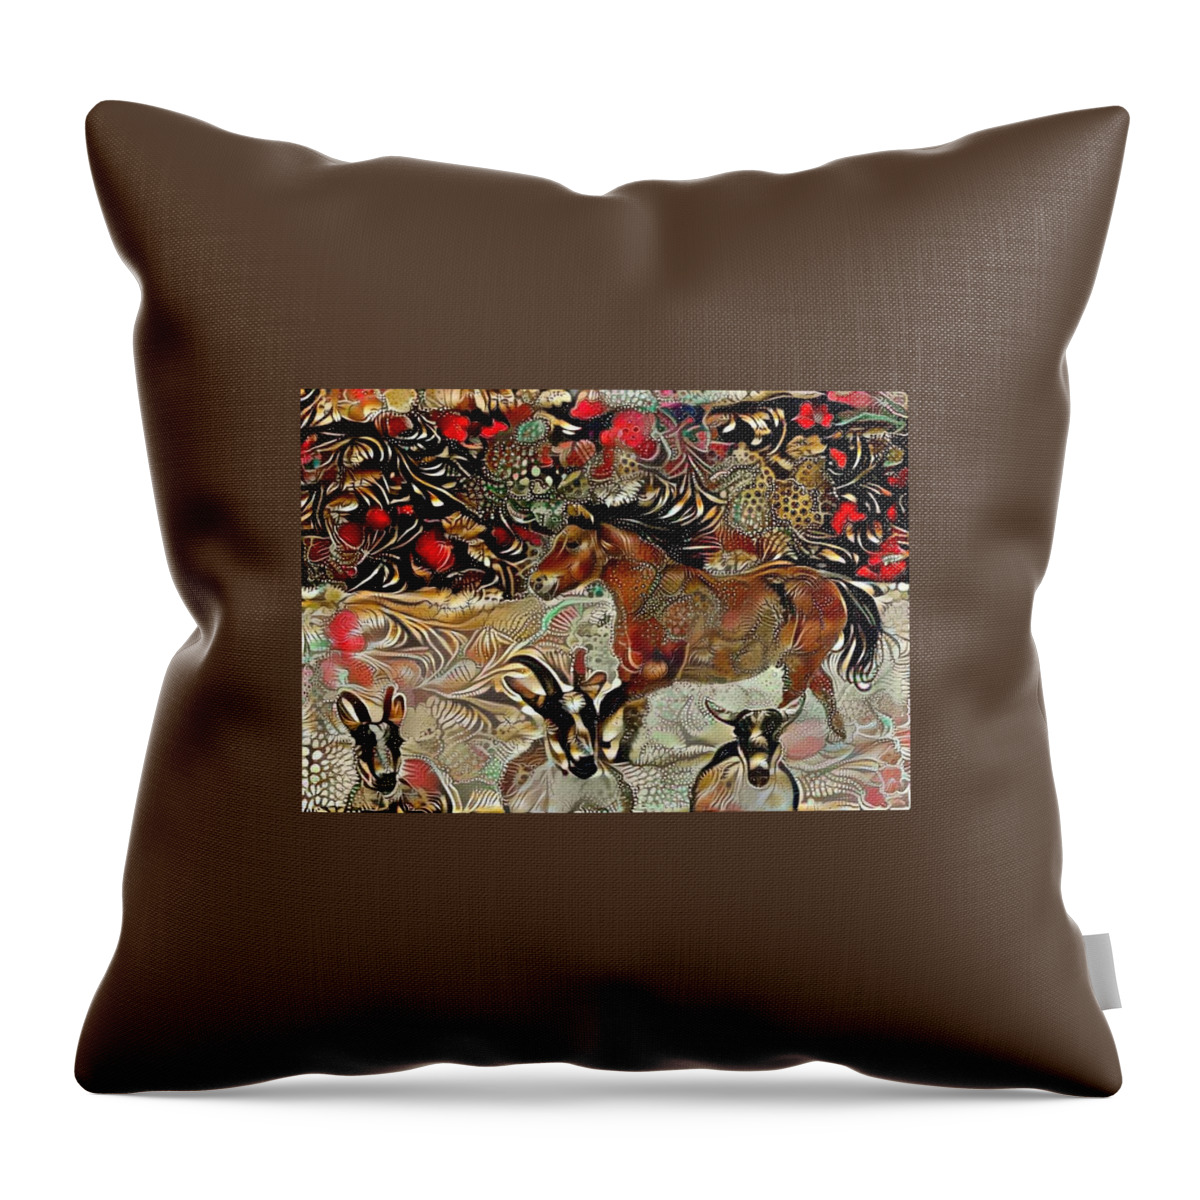 Brown Horse Throw Pillow featuring the digital art Goat Theatre - Digital 2 by Listen To Your Horse